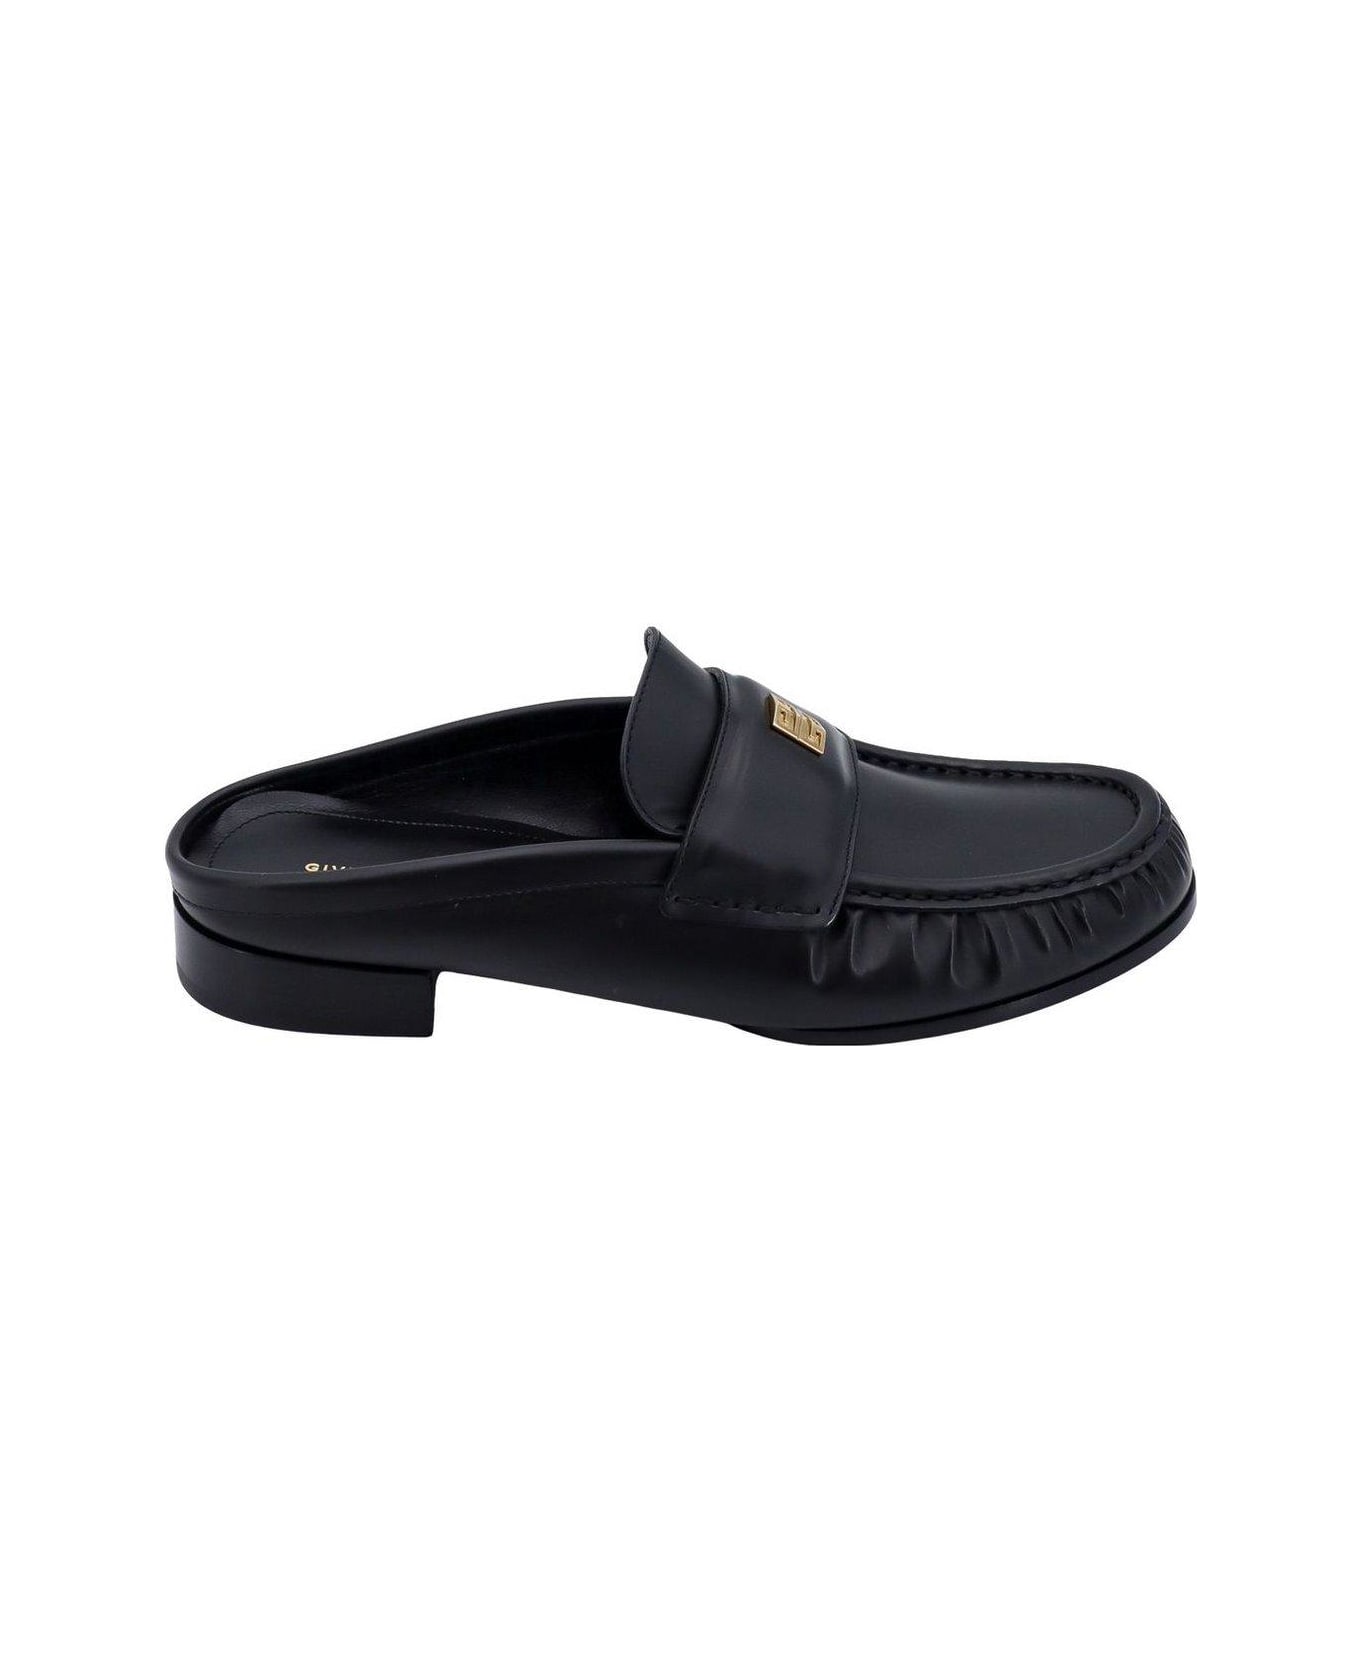 Givenchy Plaque Mules - Black